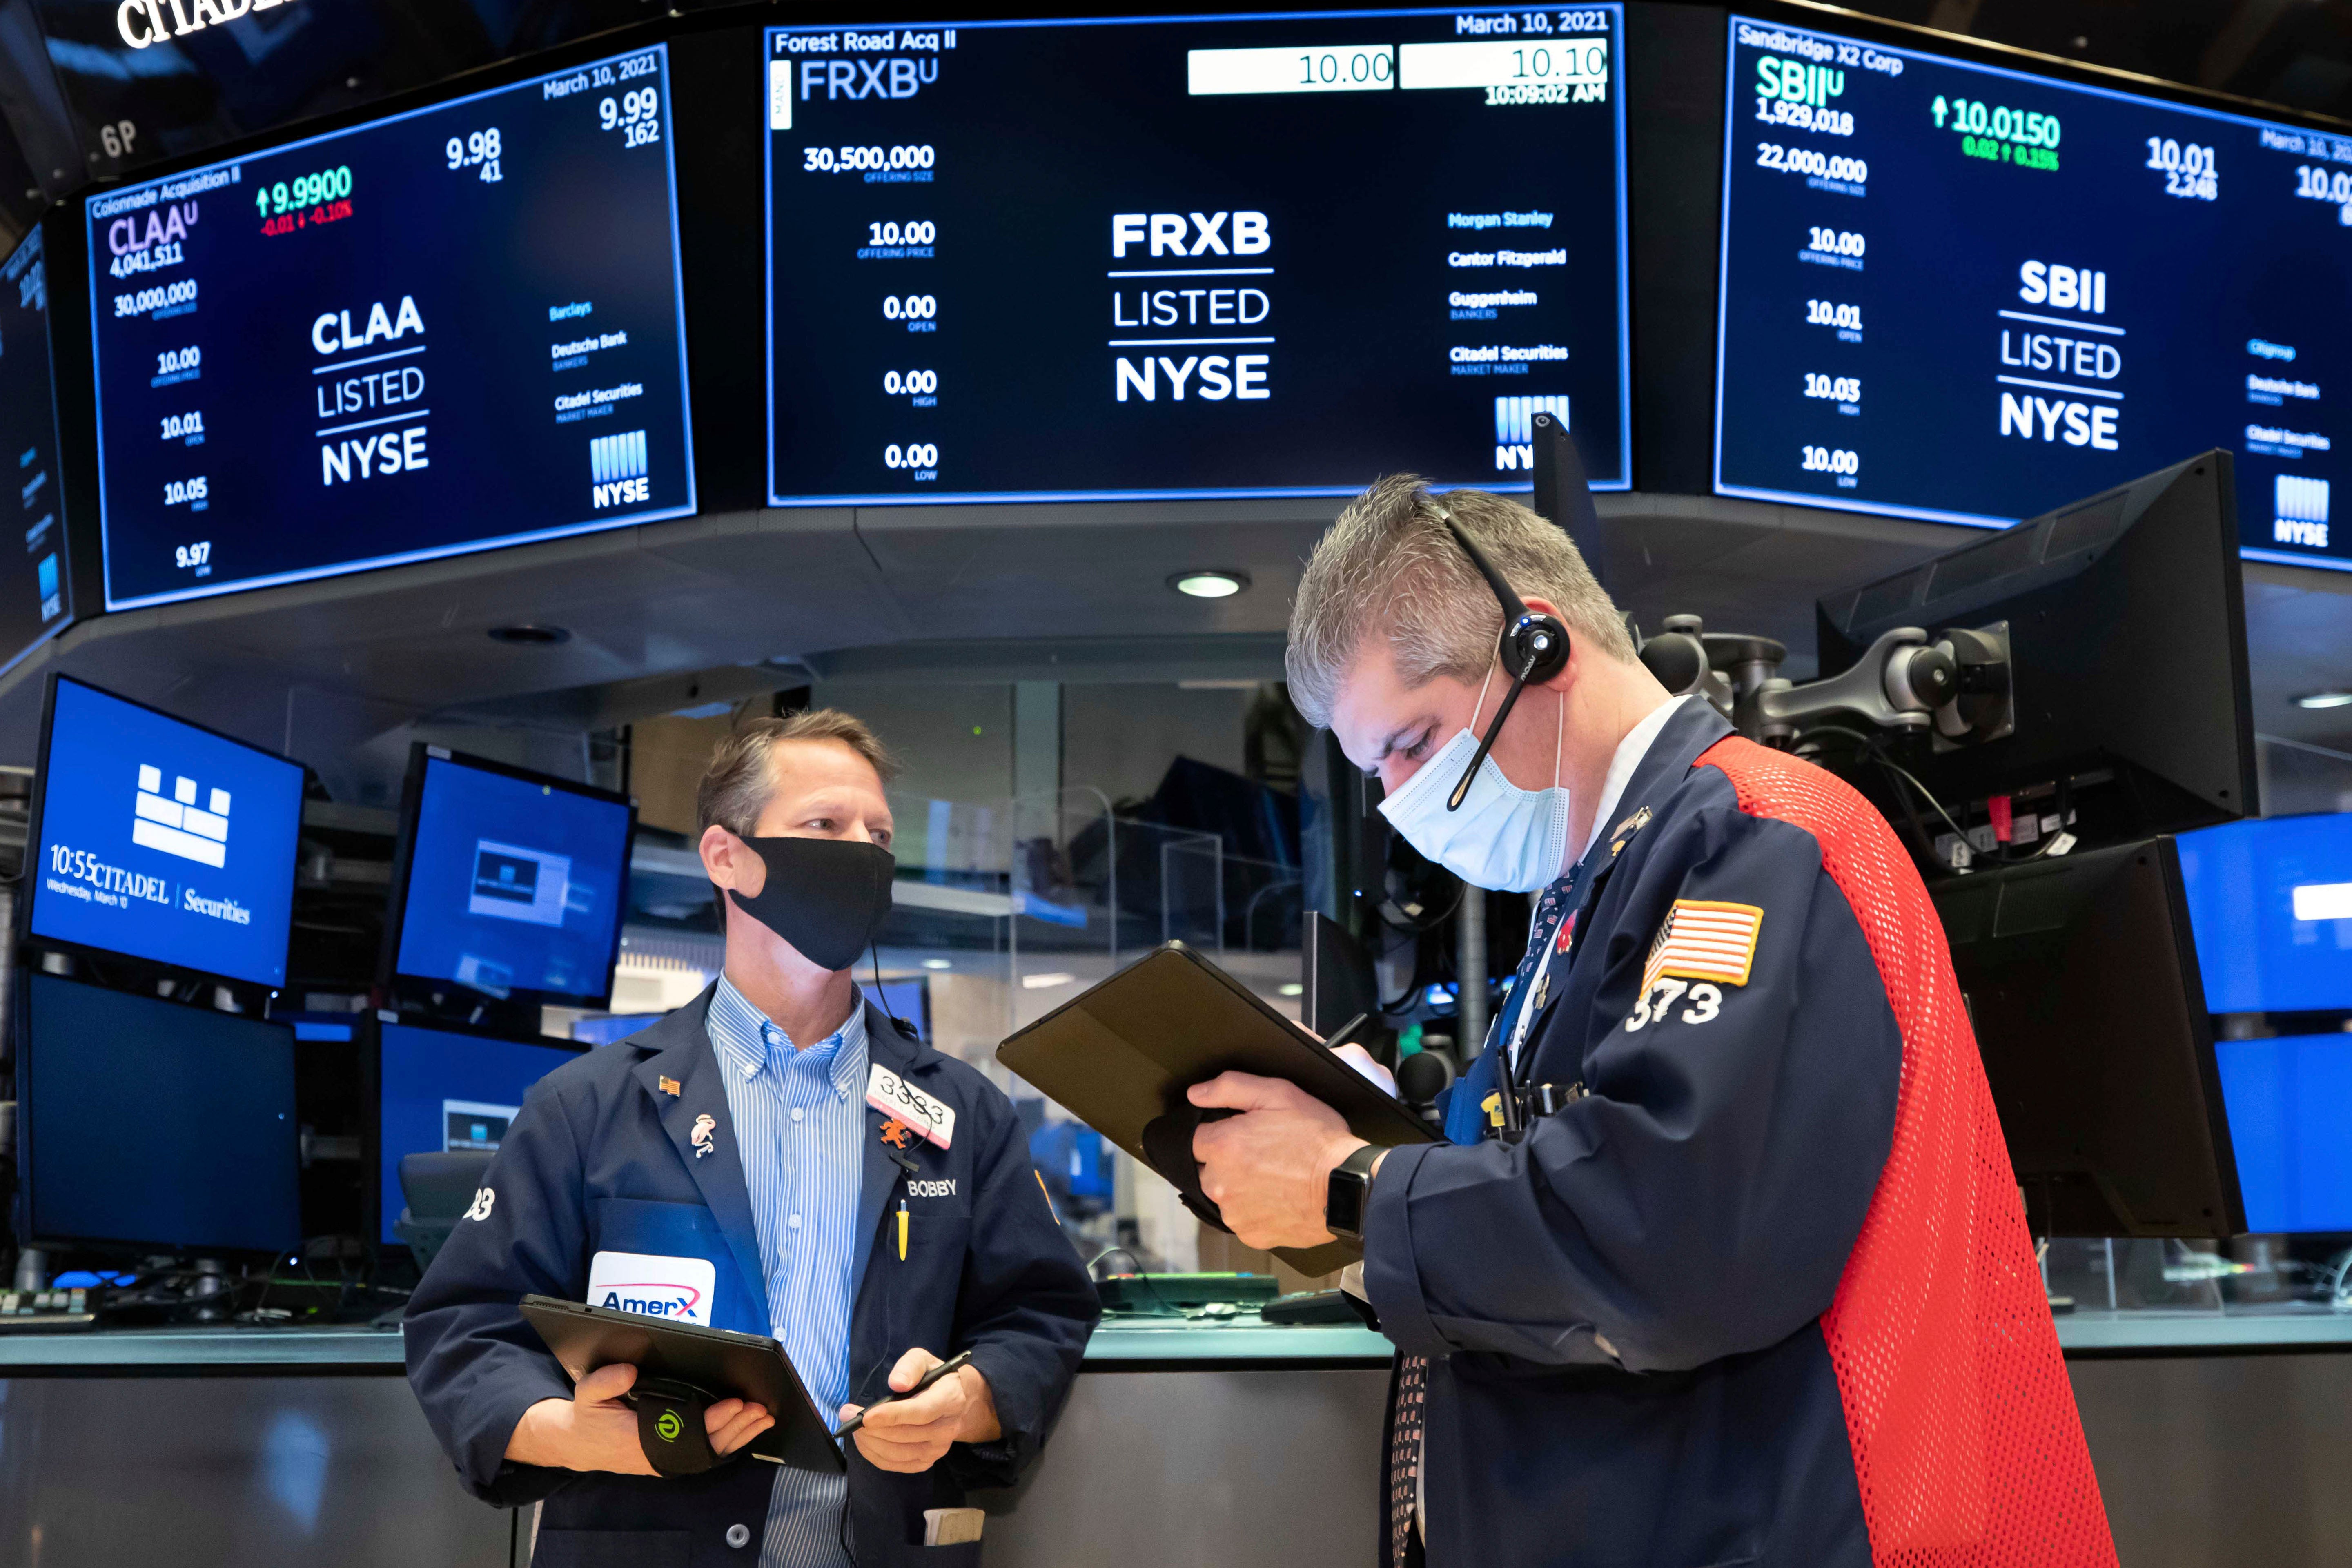 Stocks traded earlier one day after 33,000 plateaus, Fed insurance